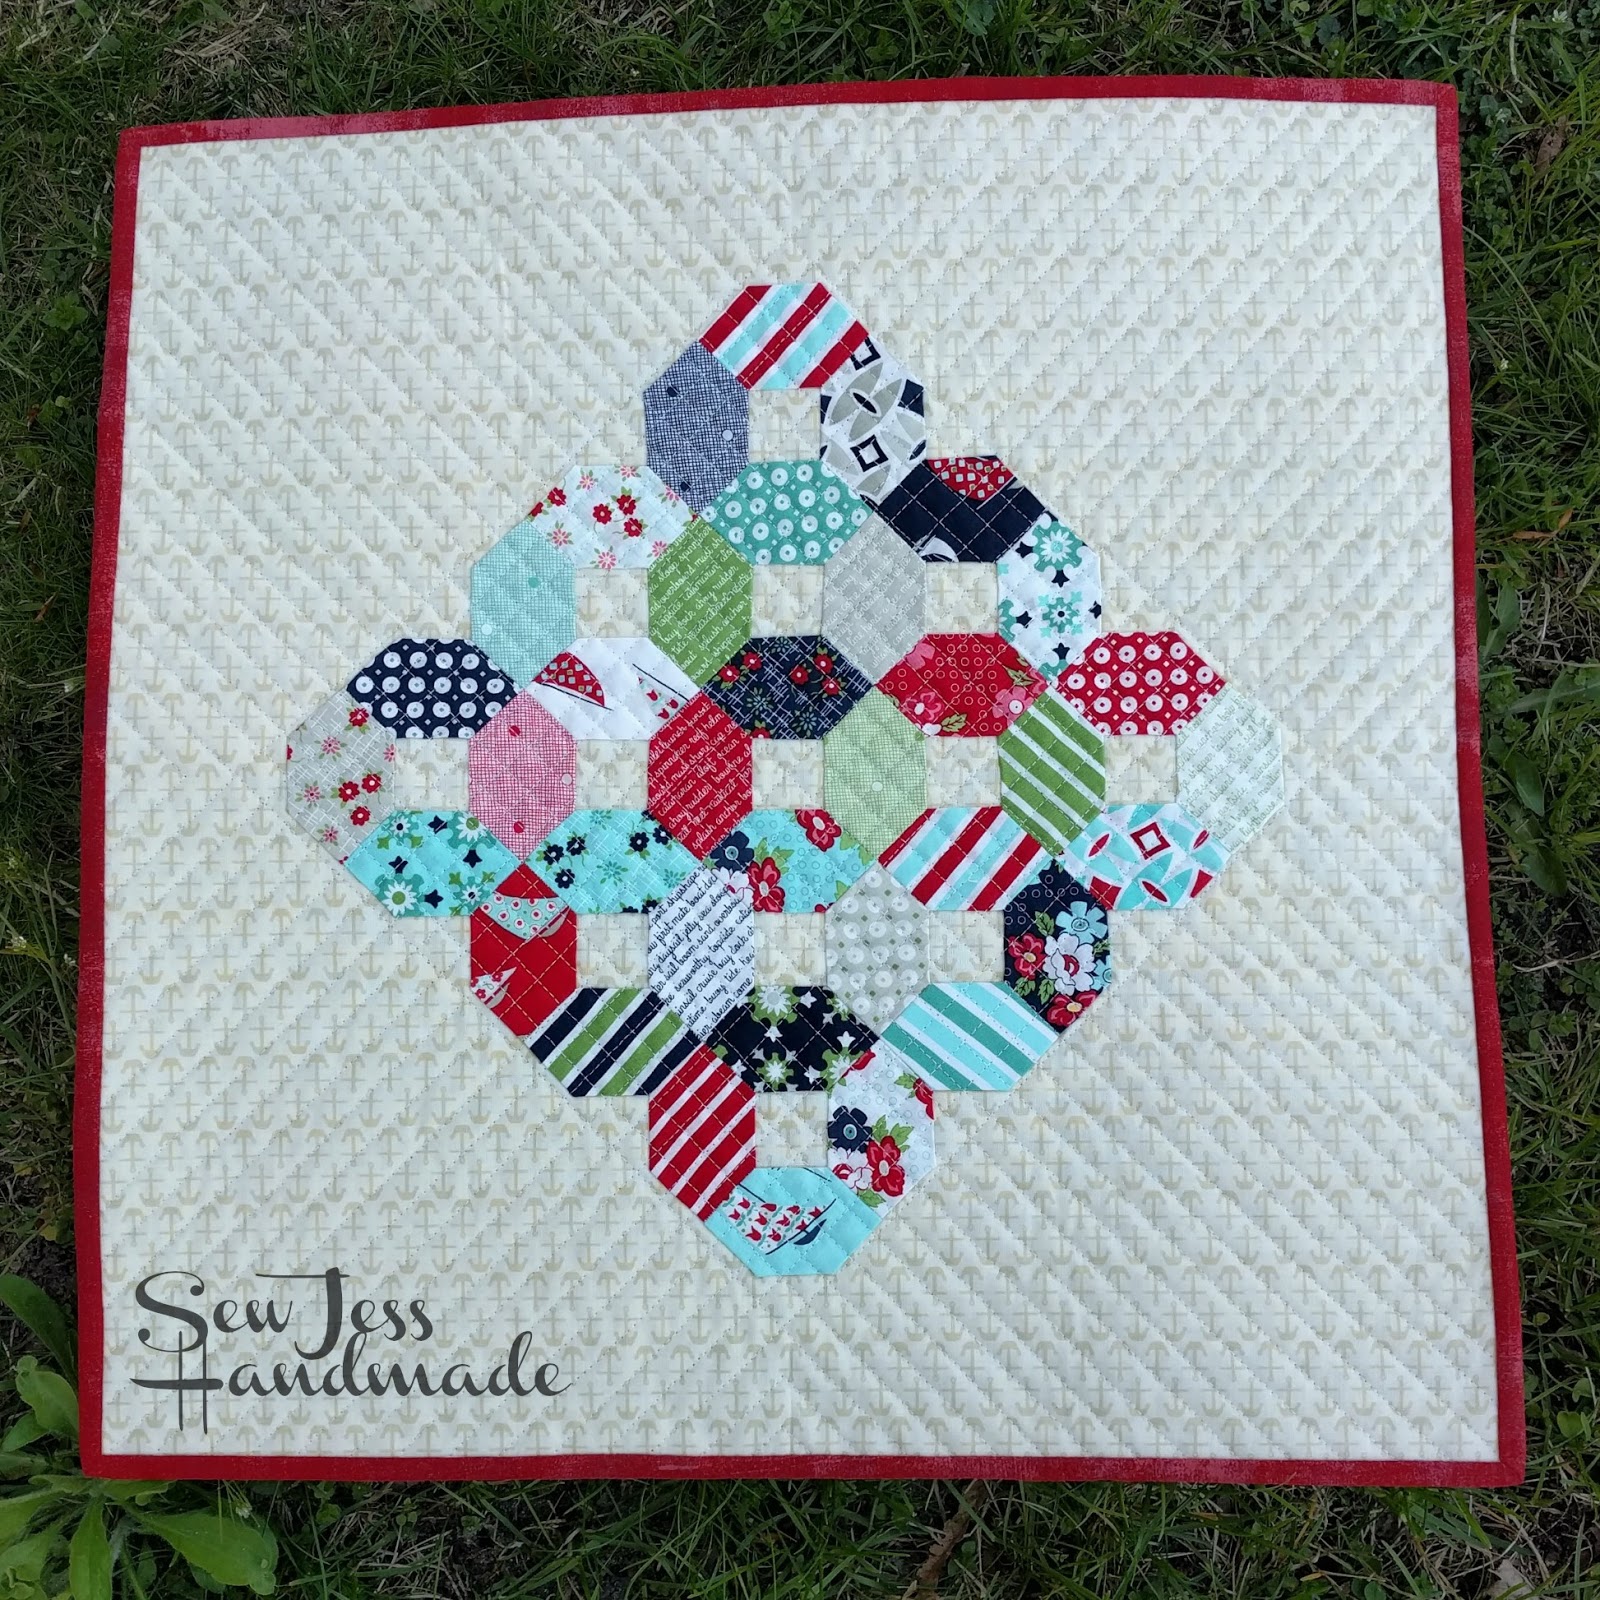 The Crafty Chemist: Charm Pack Baby Quilt